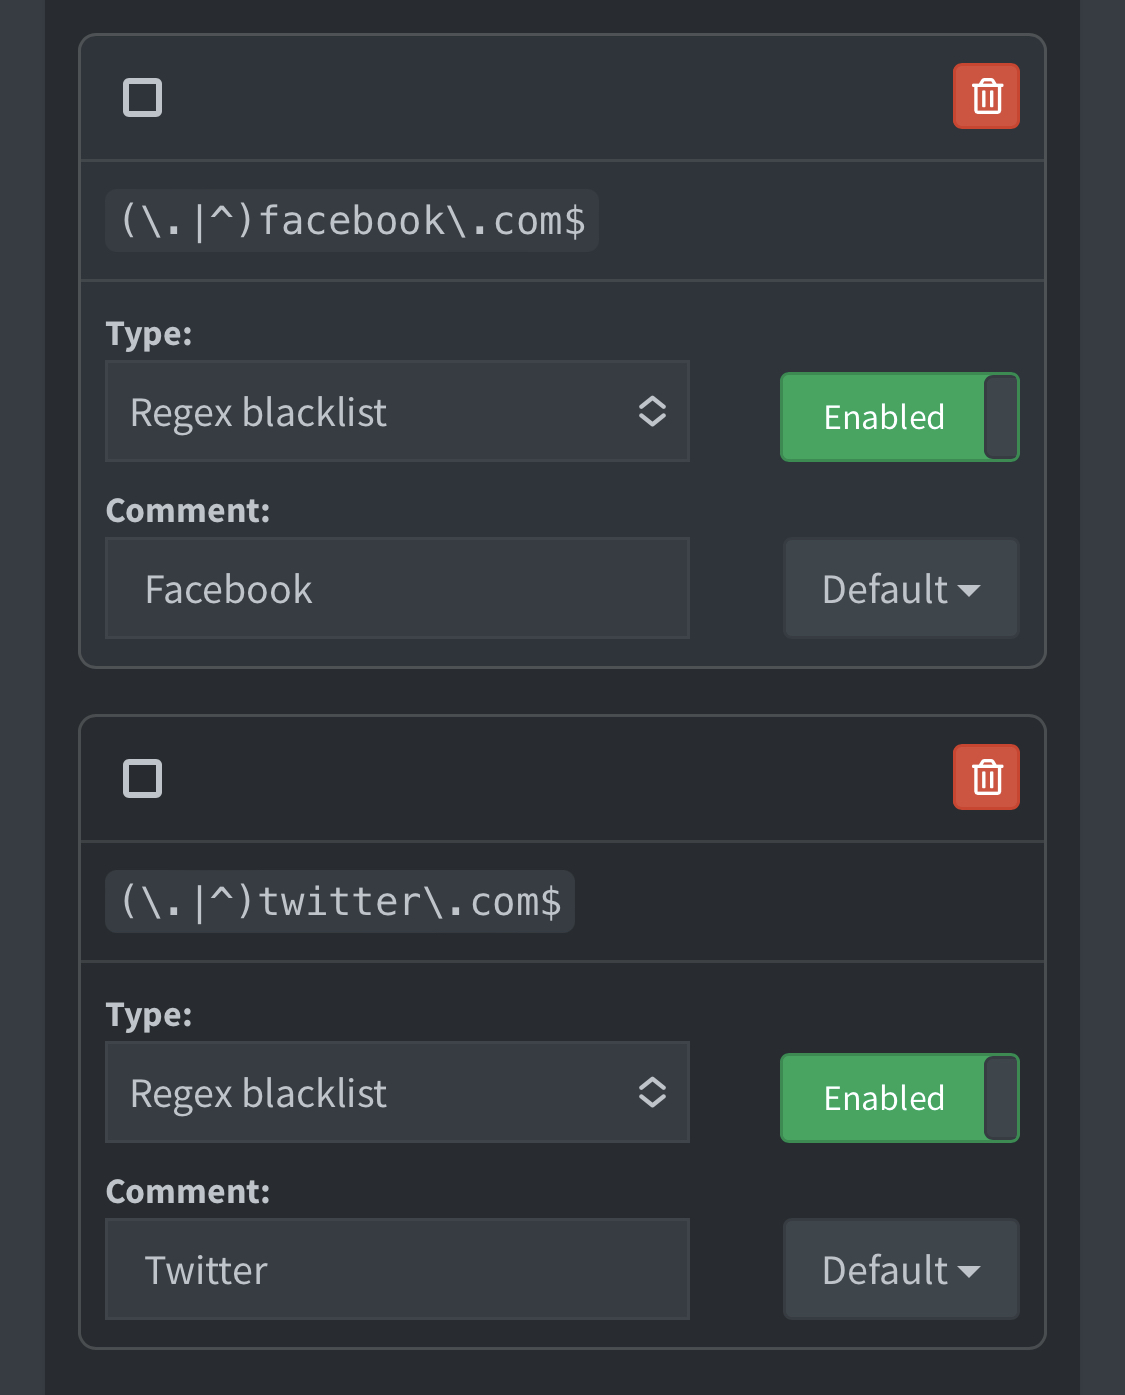 My pihole blacklist containing two entries - both wildcard entries for facebook.com and now twitter.com